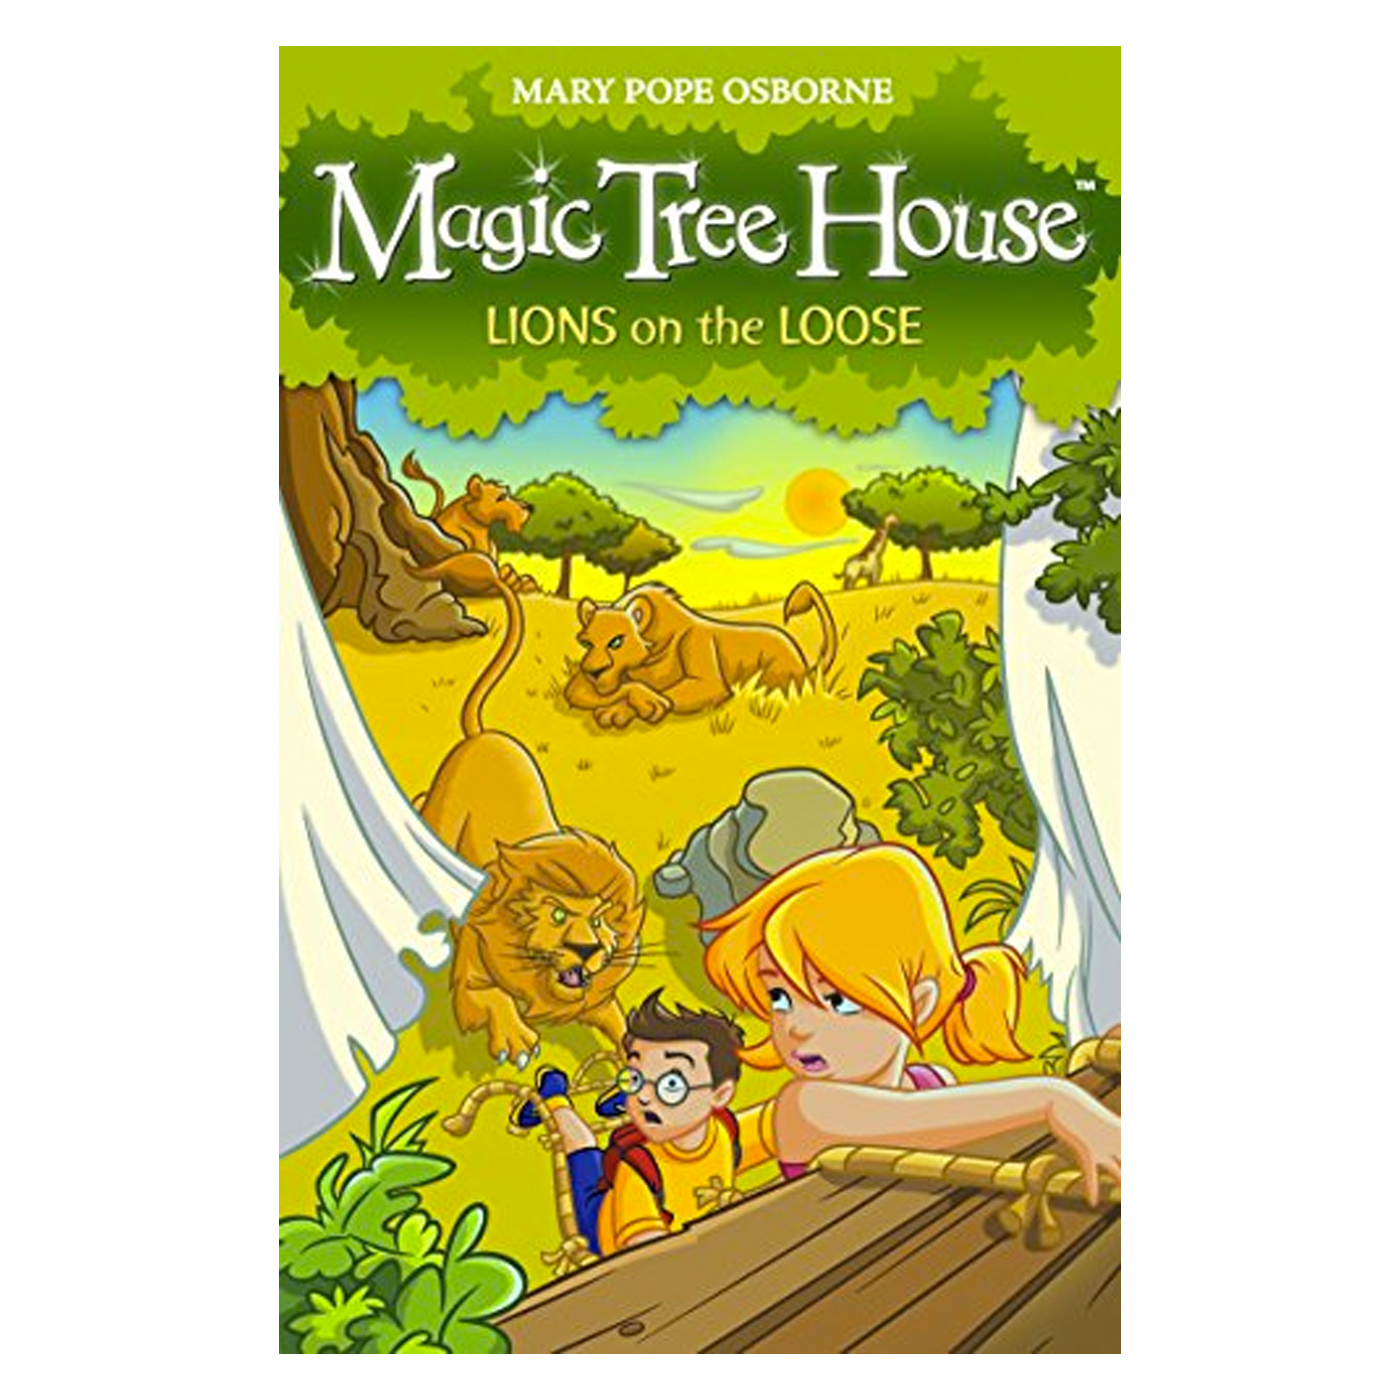  Magic Tree House 11: Lions on the Loose